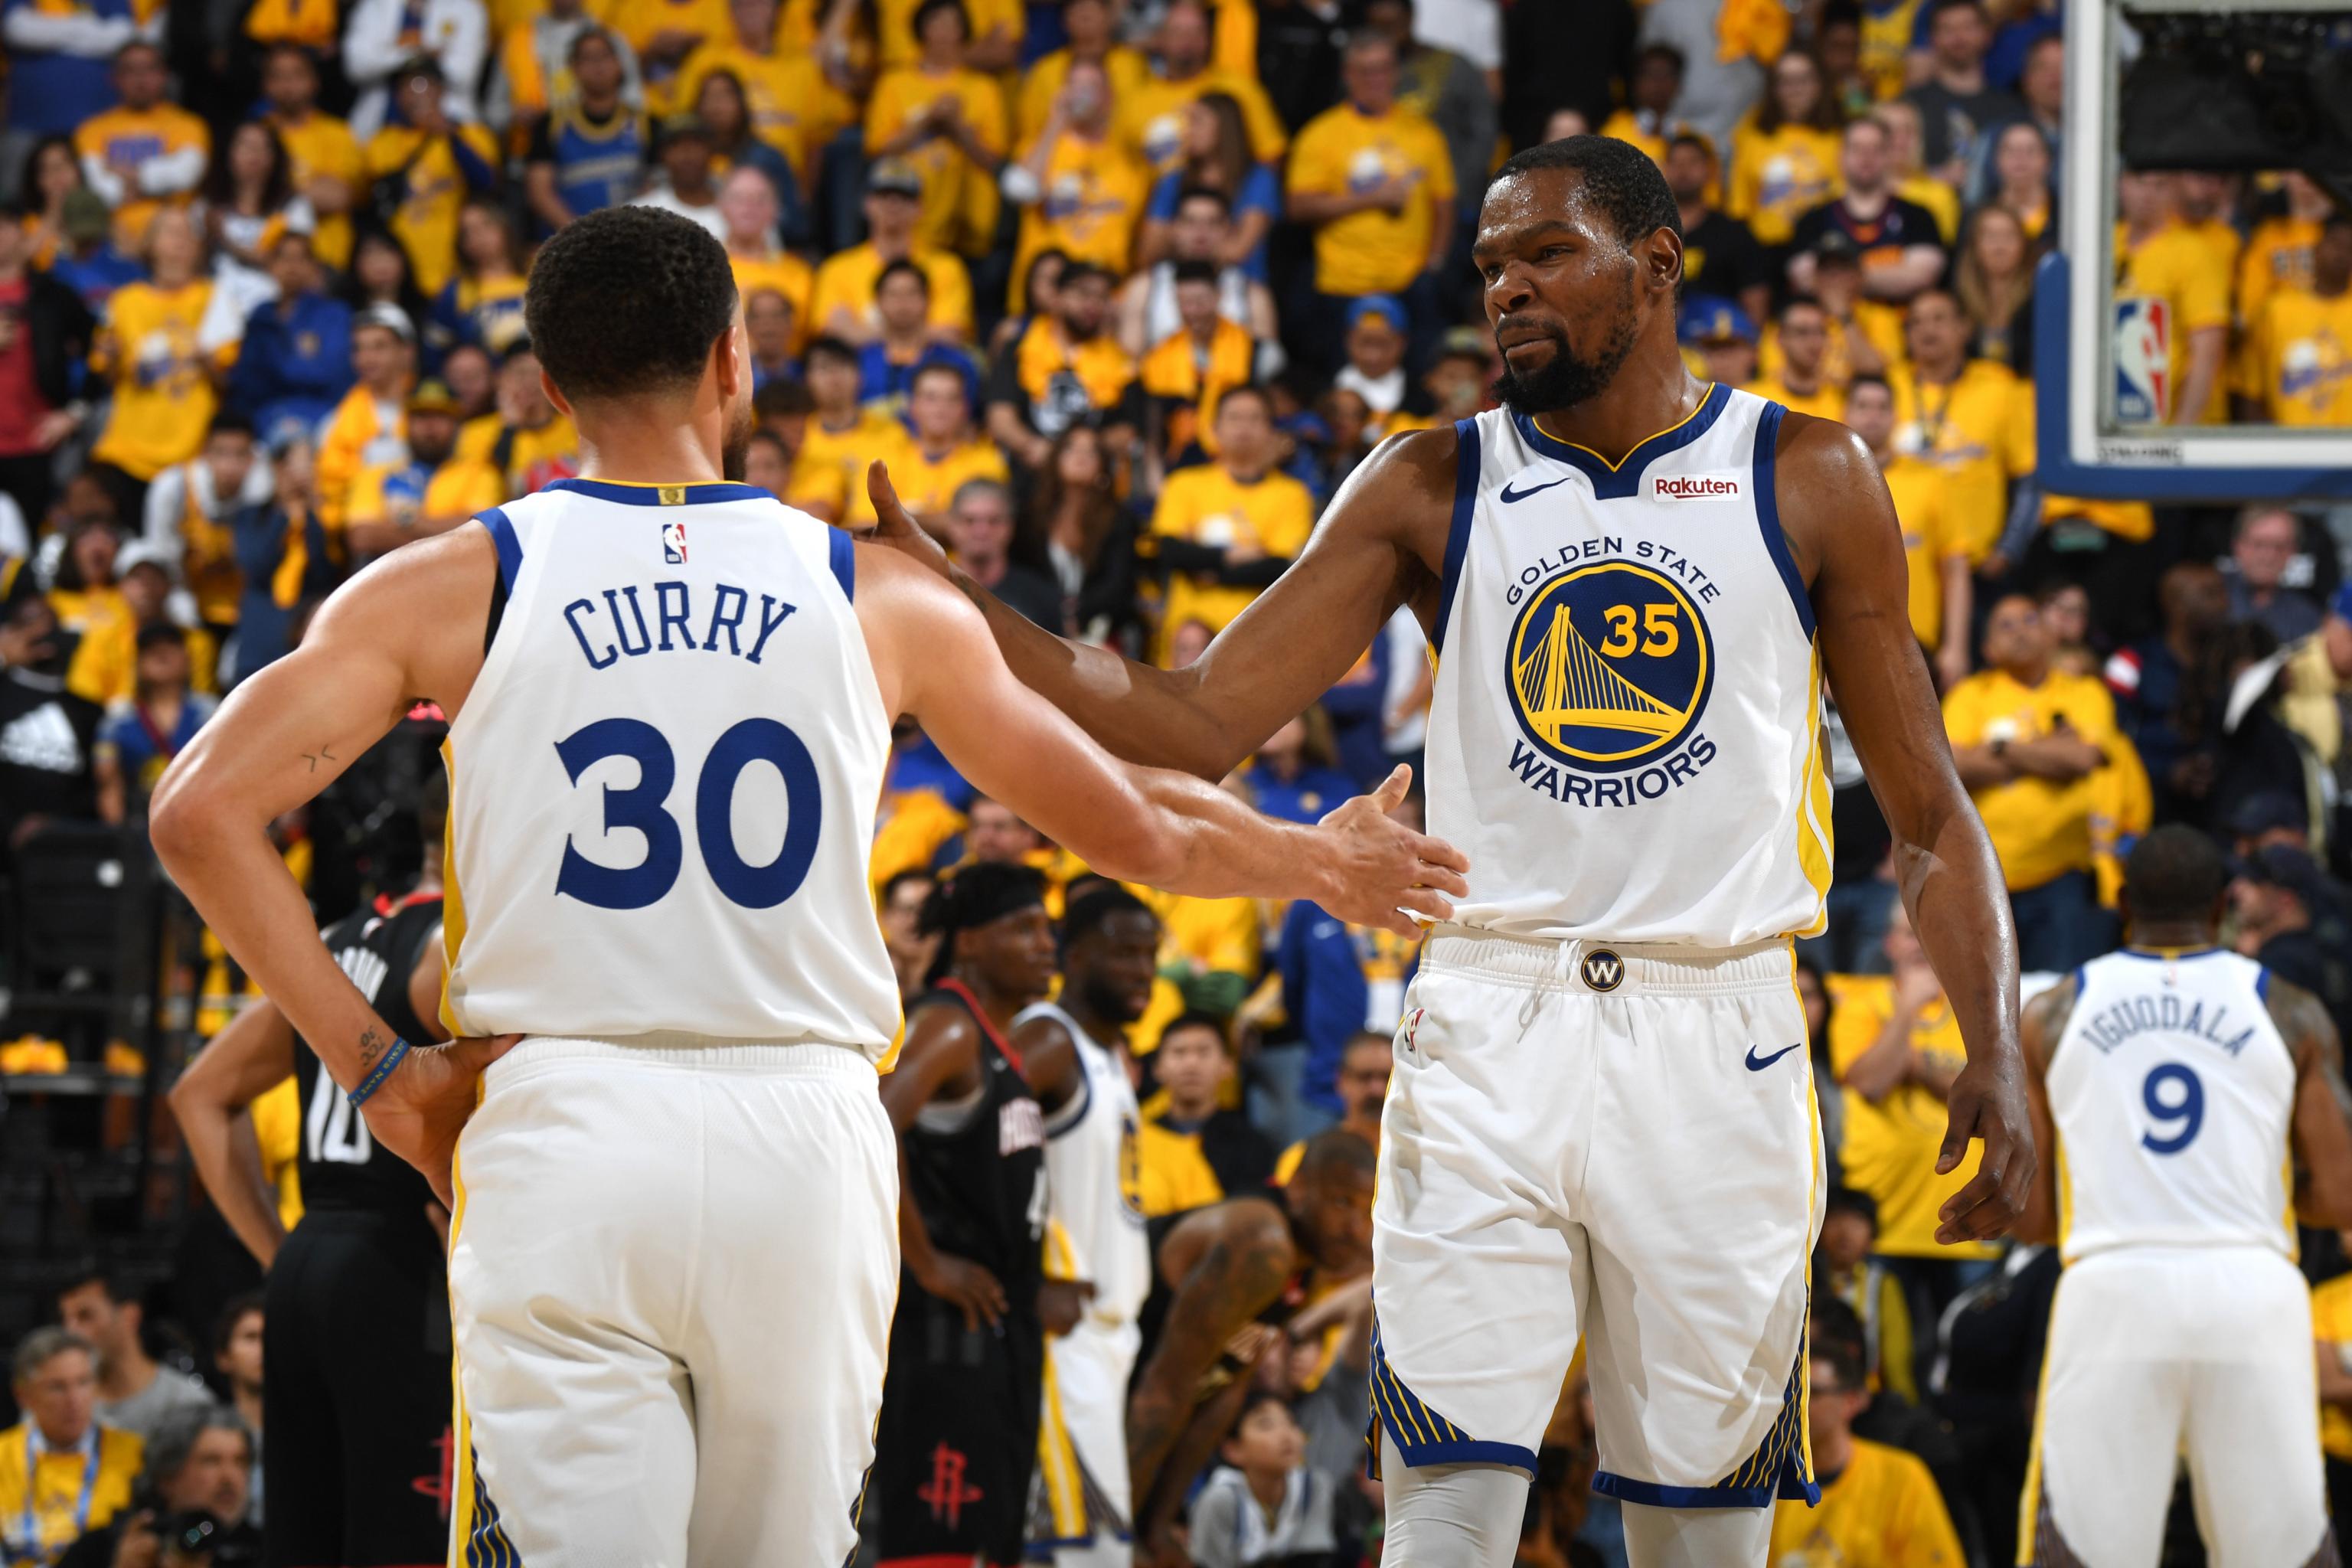 Video: Watch as Stephen Curry, Kevin Durant Reunite After Warriors vs. Nets. Bleacher Report. Latest News, Videos and Highlights